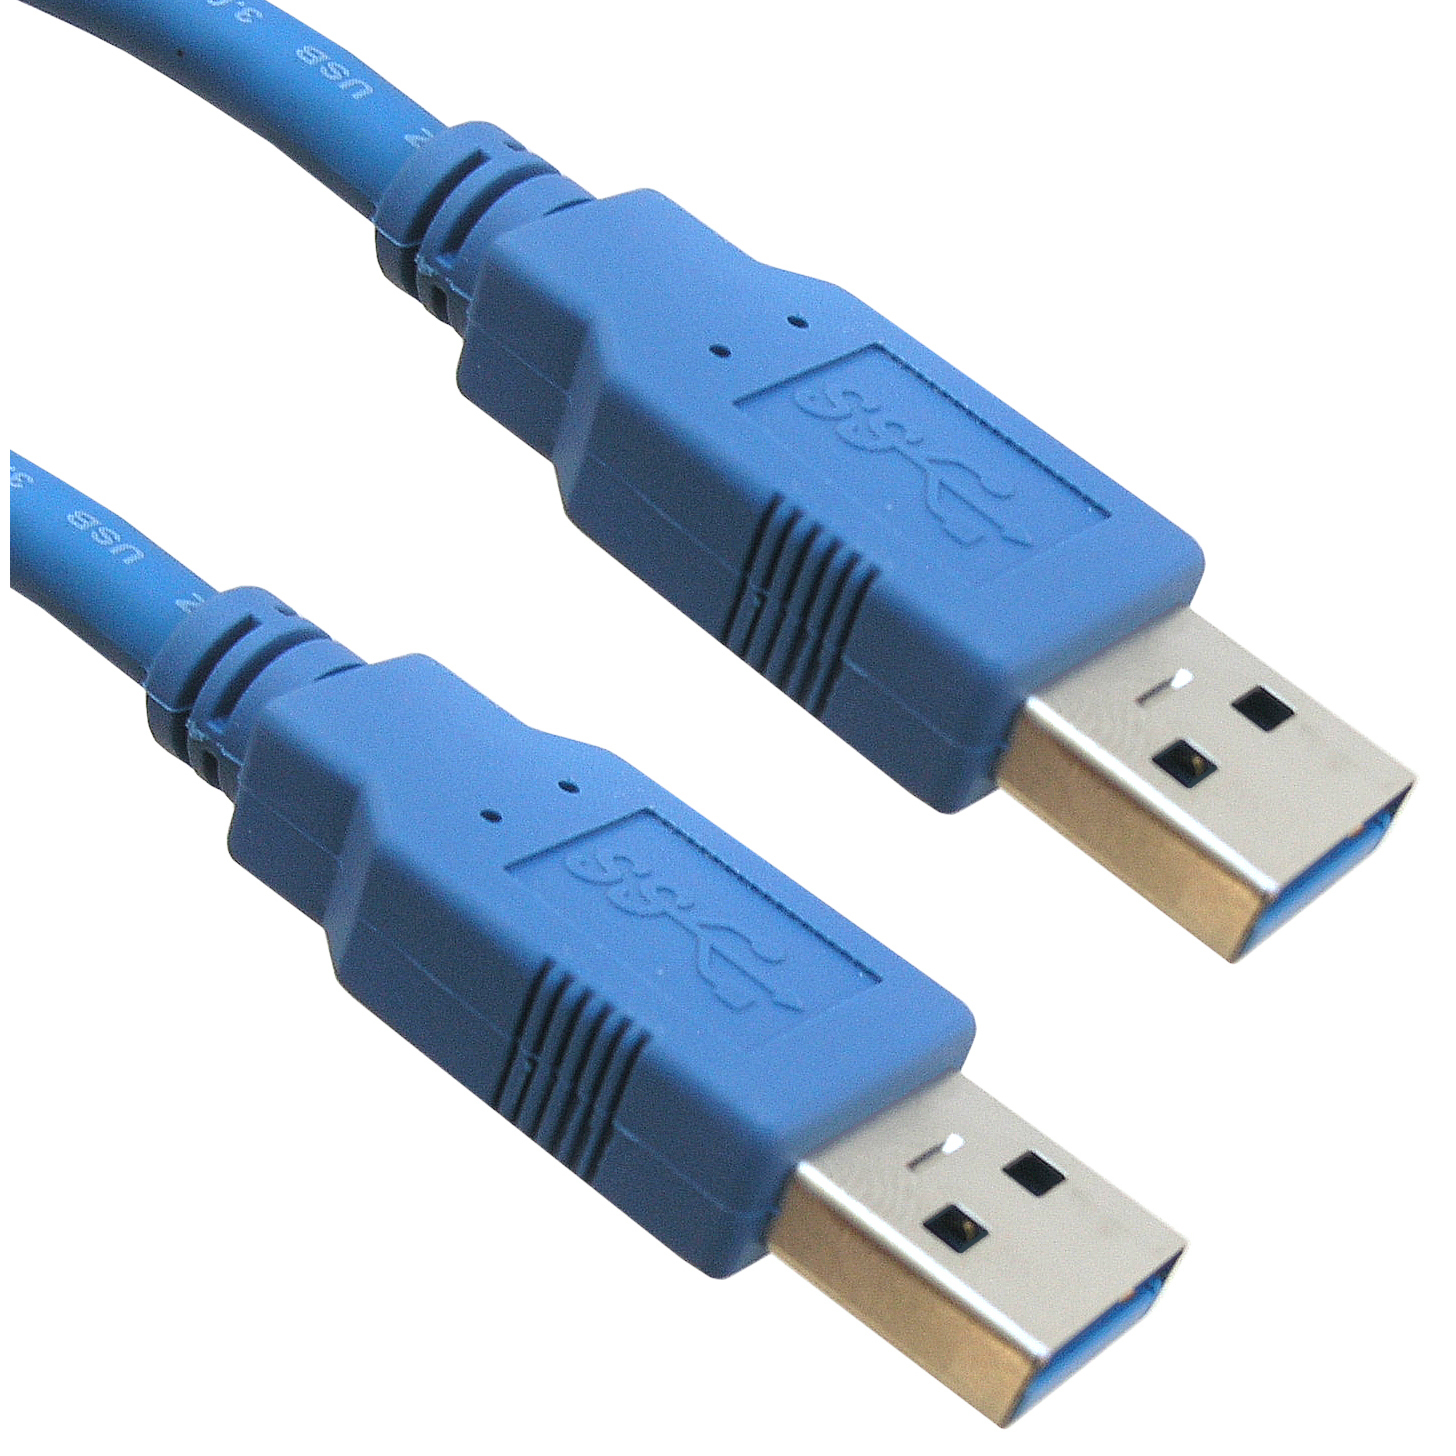 USB 3.0 A Male to A Male Cable Iin Blue